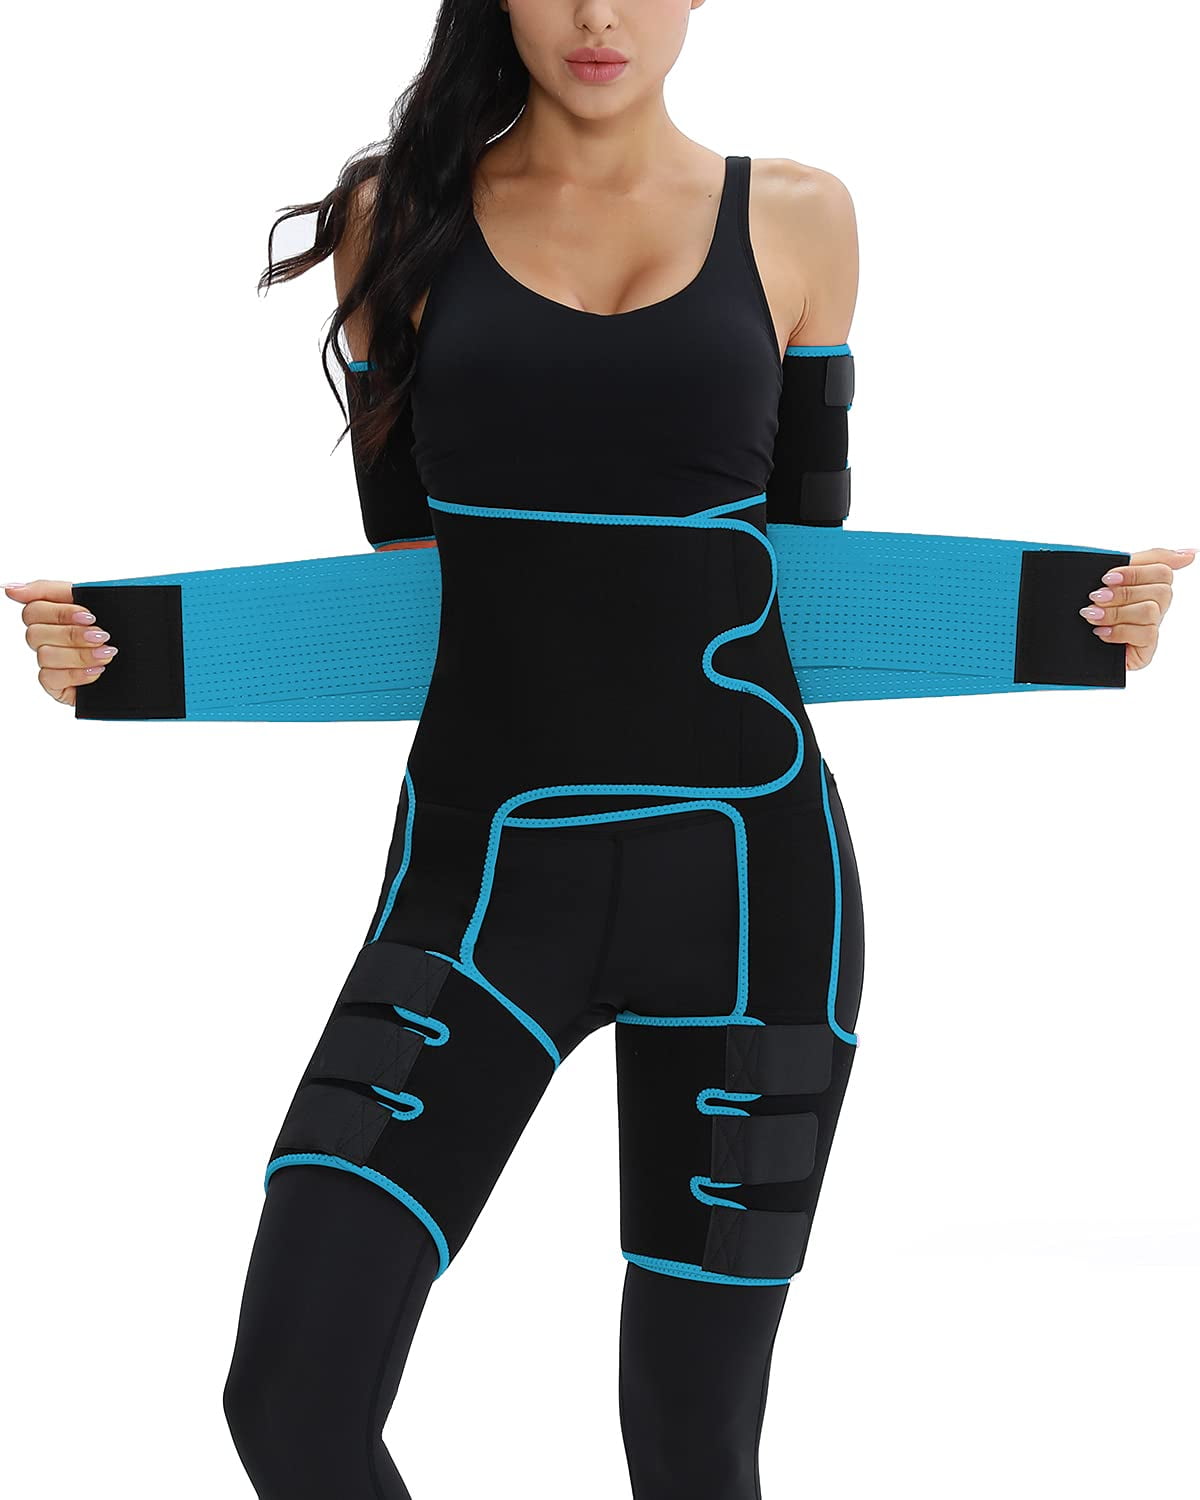 Reshe 4 in 1 High Waist Arm and Thigh Wast Trainer for Women Sweat Band Waist Trimmer Plus Size 